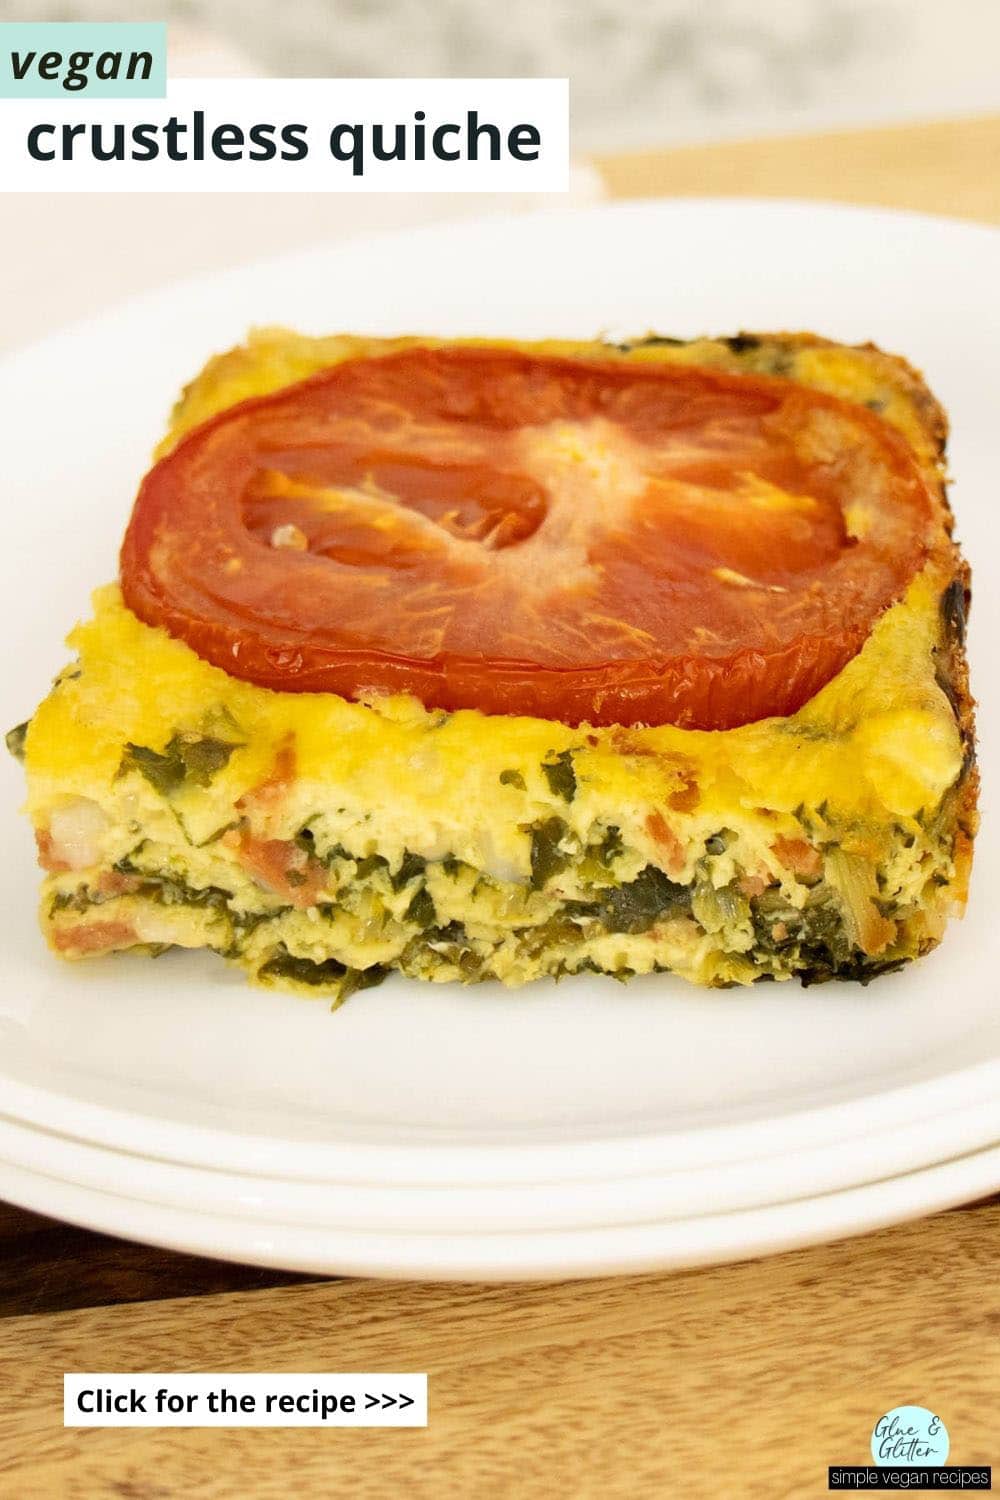 slice of crustless vegan quiche on a white plate, text overlay